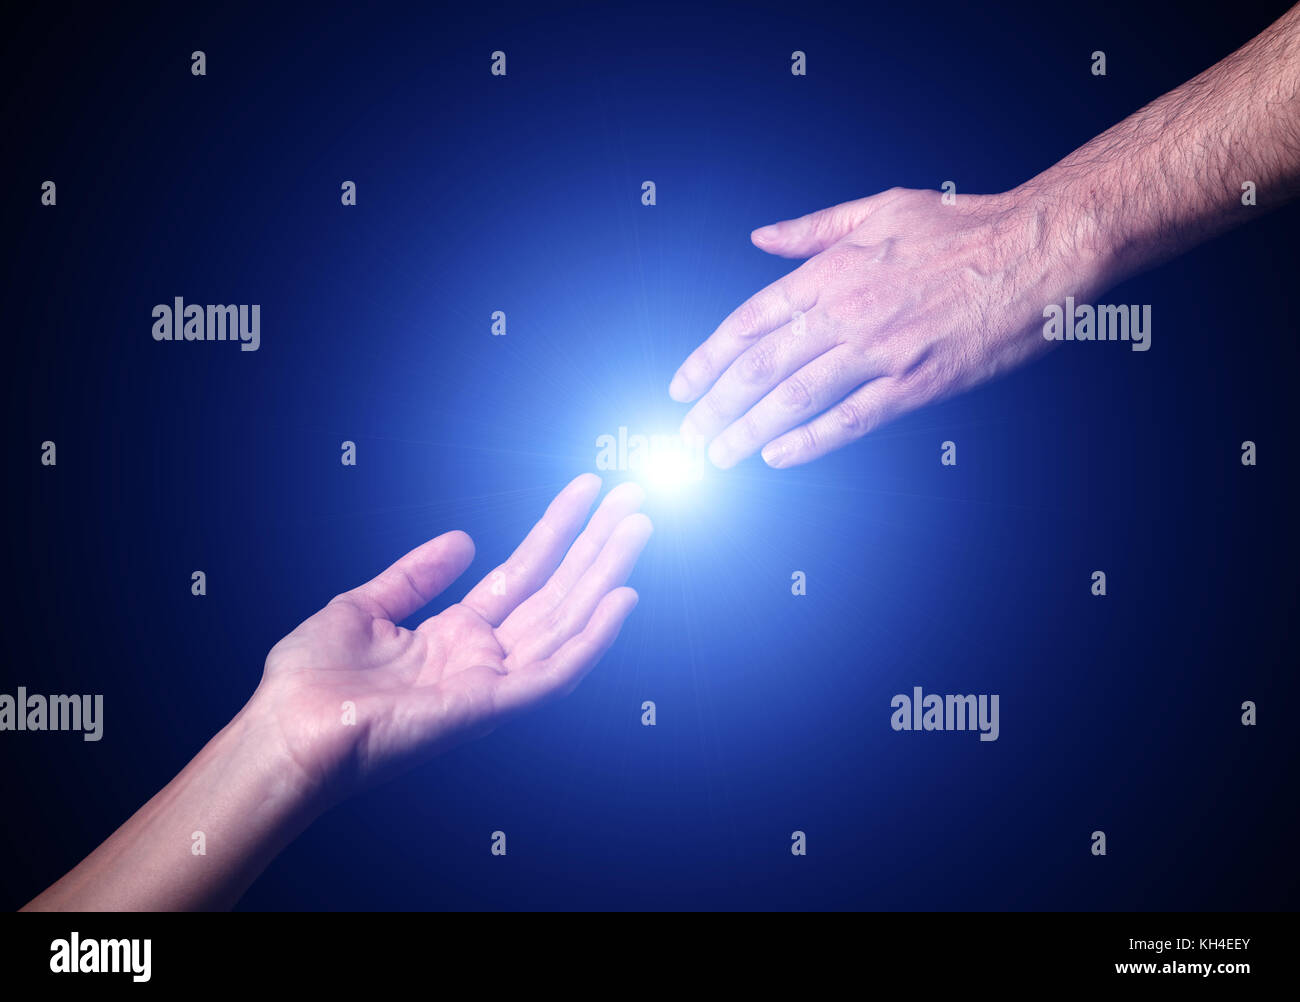 Reaching and touching hands. Bright light star flare with touching fingertips. Concept for salvation, rescue, friendship, guidance. Black background. Stock Photo